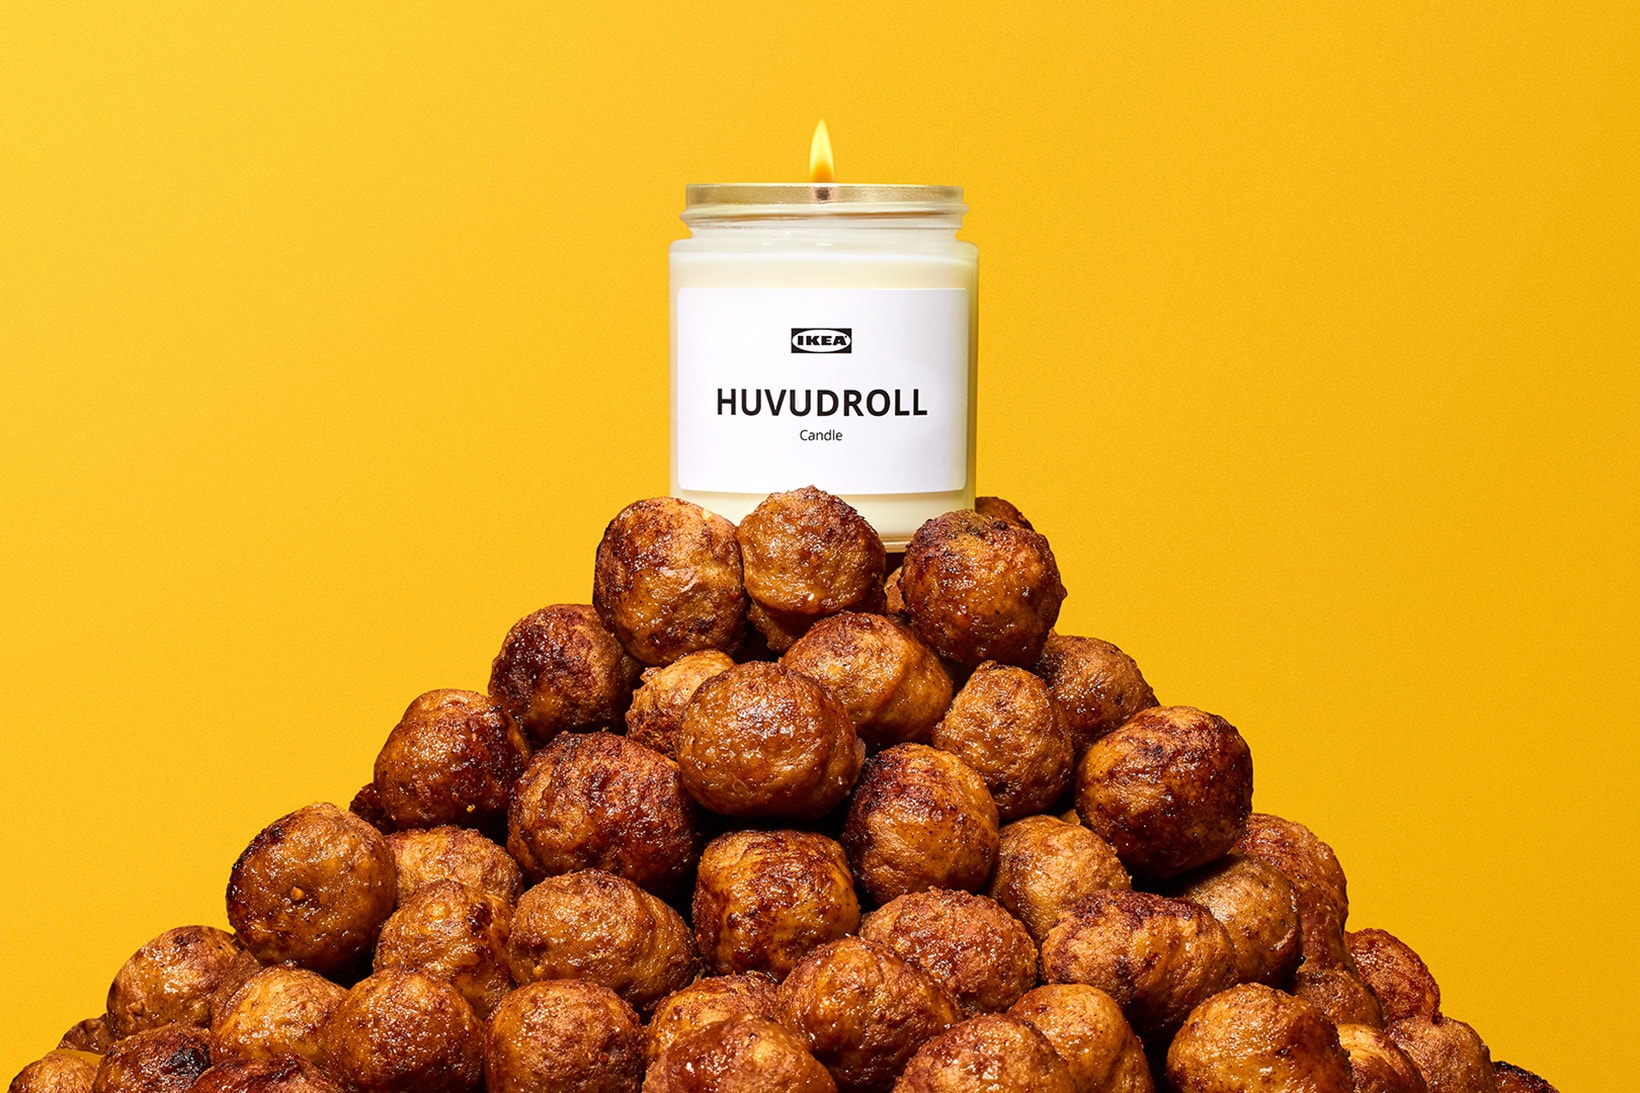 IKEA Store in a Box HUVUDROLL Meatball Scented Candle